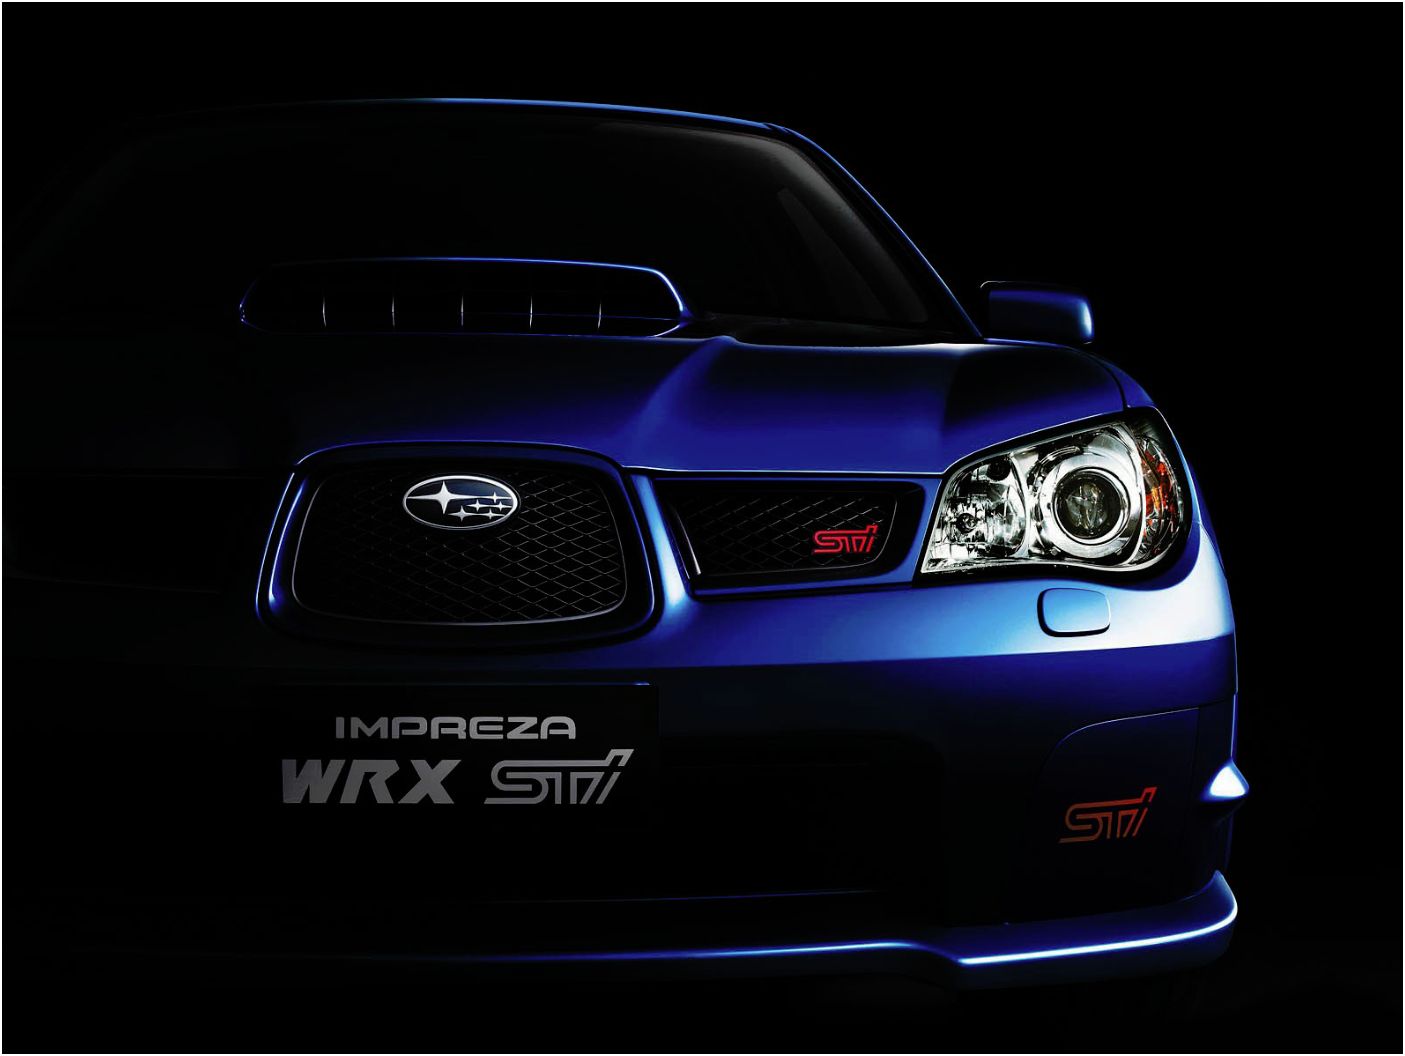 Blue Subaru Wrx Sti With Red Logo Looks Great And The Background